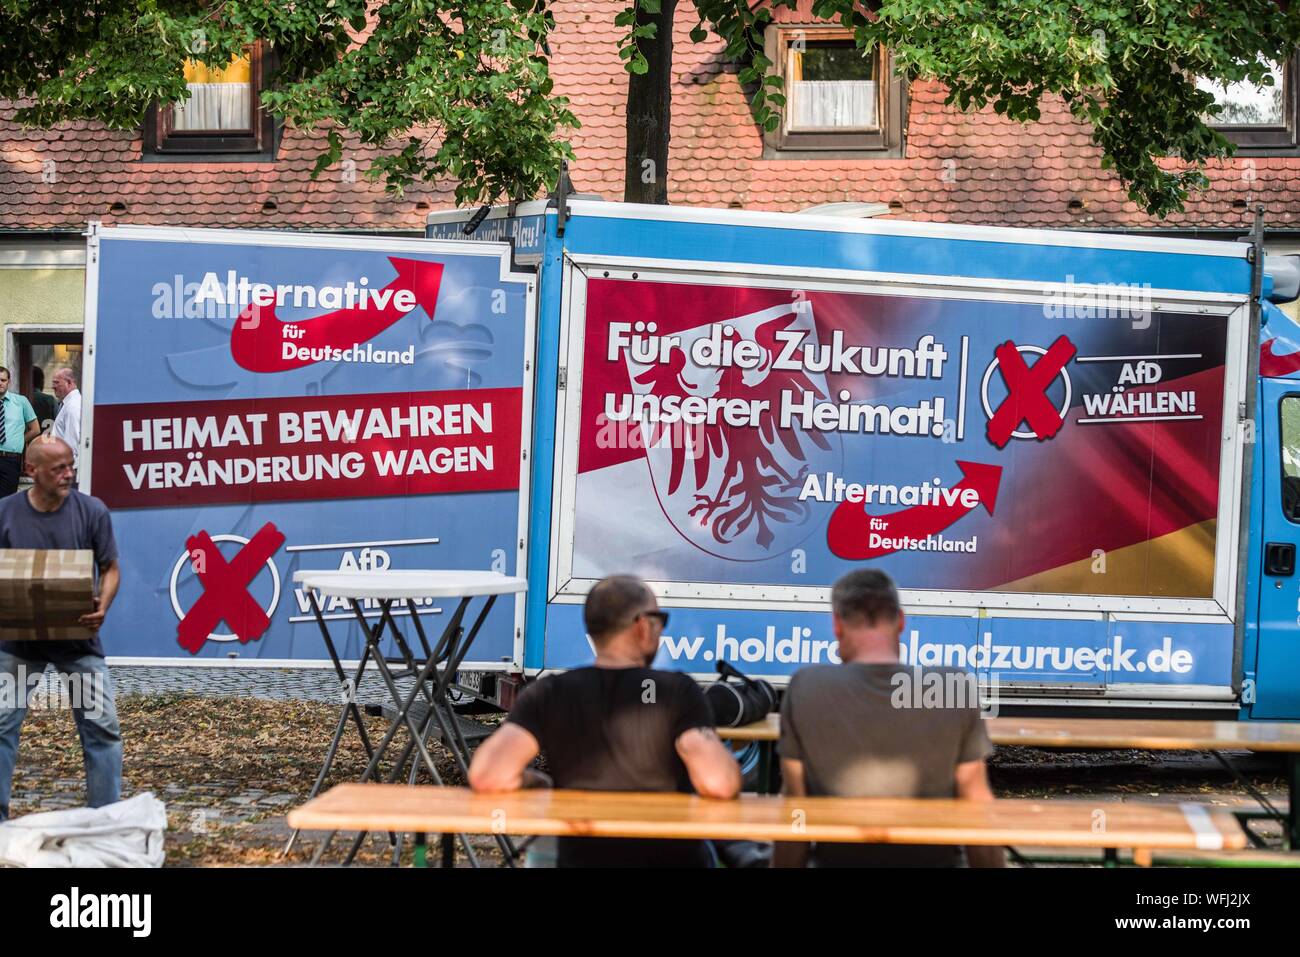 Koenigs Wusterhausen, Brandenburg, Germany. August 30, 2019, Koenigs Wusterhausen, Brandenburg, Germany: Aiming to be the strongest party in the eastern state of Brandenburg, Germany, the AfD held a Wahlparty (election party) at Koenigs Wusterhausen. In attendance were figures such as Andreas Kalbitz, who was recently outed with connections to right-extremist circles, Bjoern Hoecke, the embattled grounder of the AfD in Thueringen, and Joerg Urban, an extreme-rightist of the AfD in Saxony. Joerg Meuthen of the AfD in the European Parliament did not appear, despite being announced. (Credit Ima Stock Photo